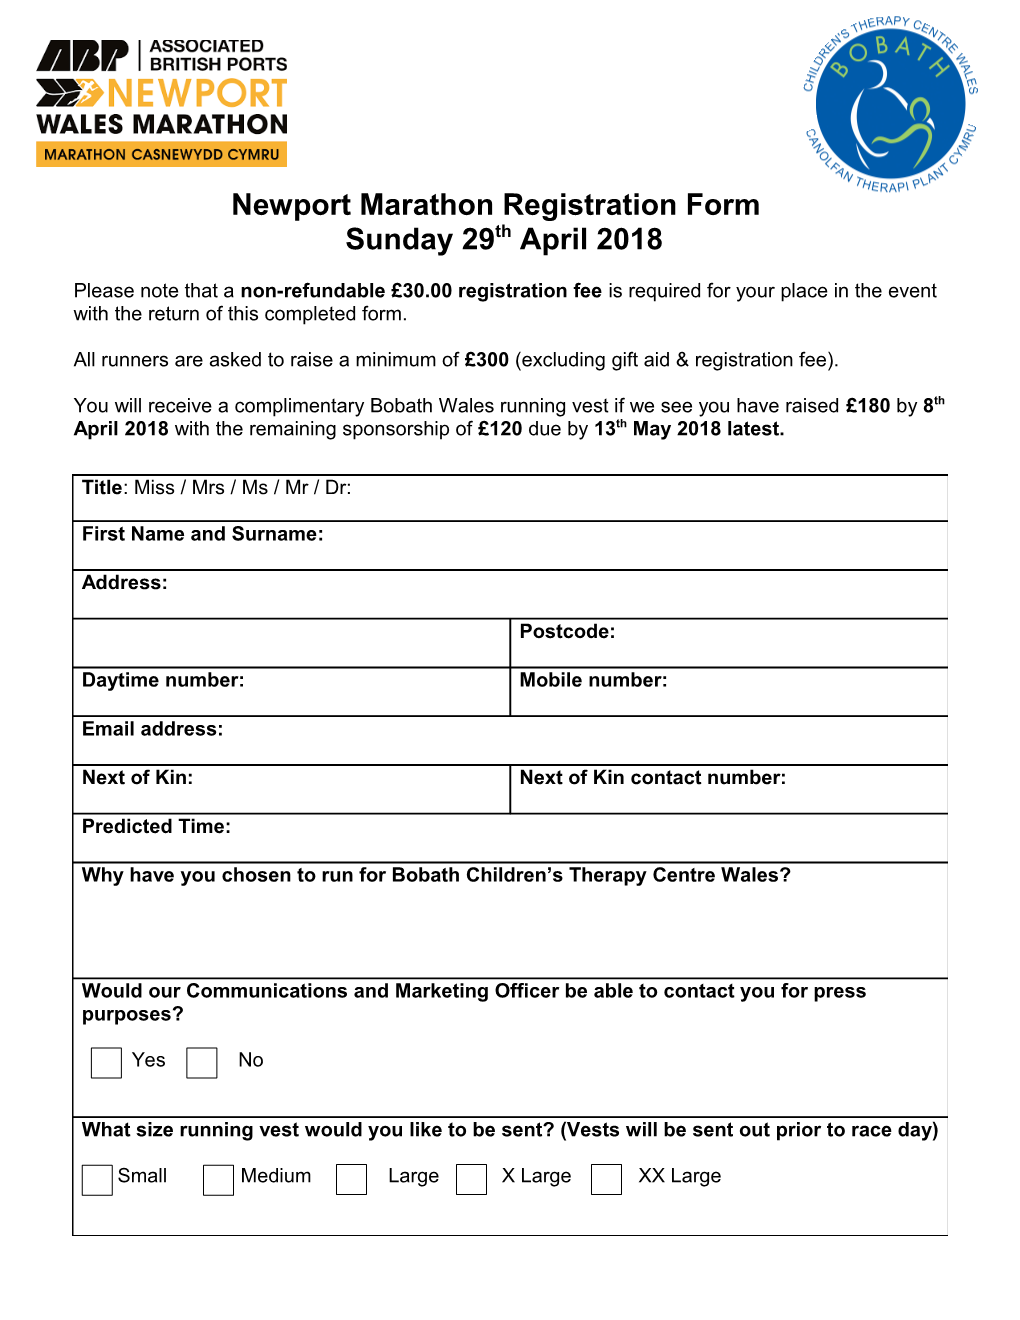 All Runners Are Asked to Raise a Minimum of 300 (Excluding Gift Aid Registration Fee)